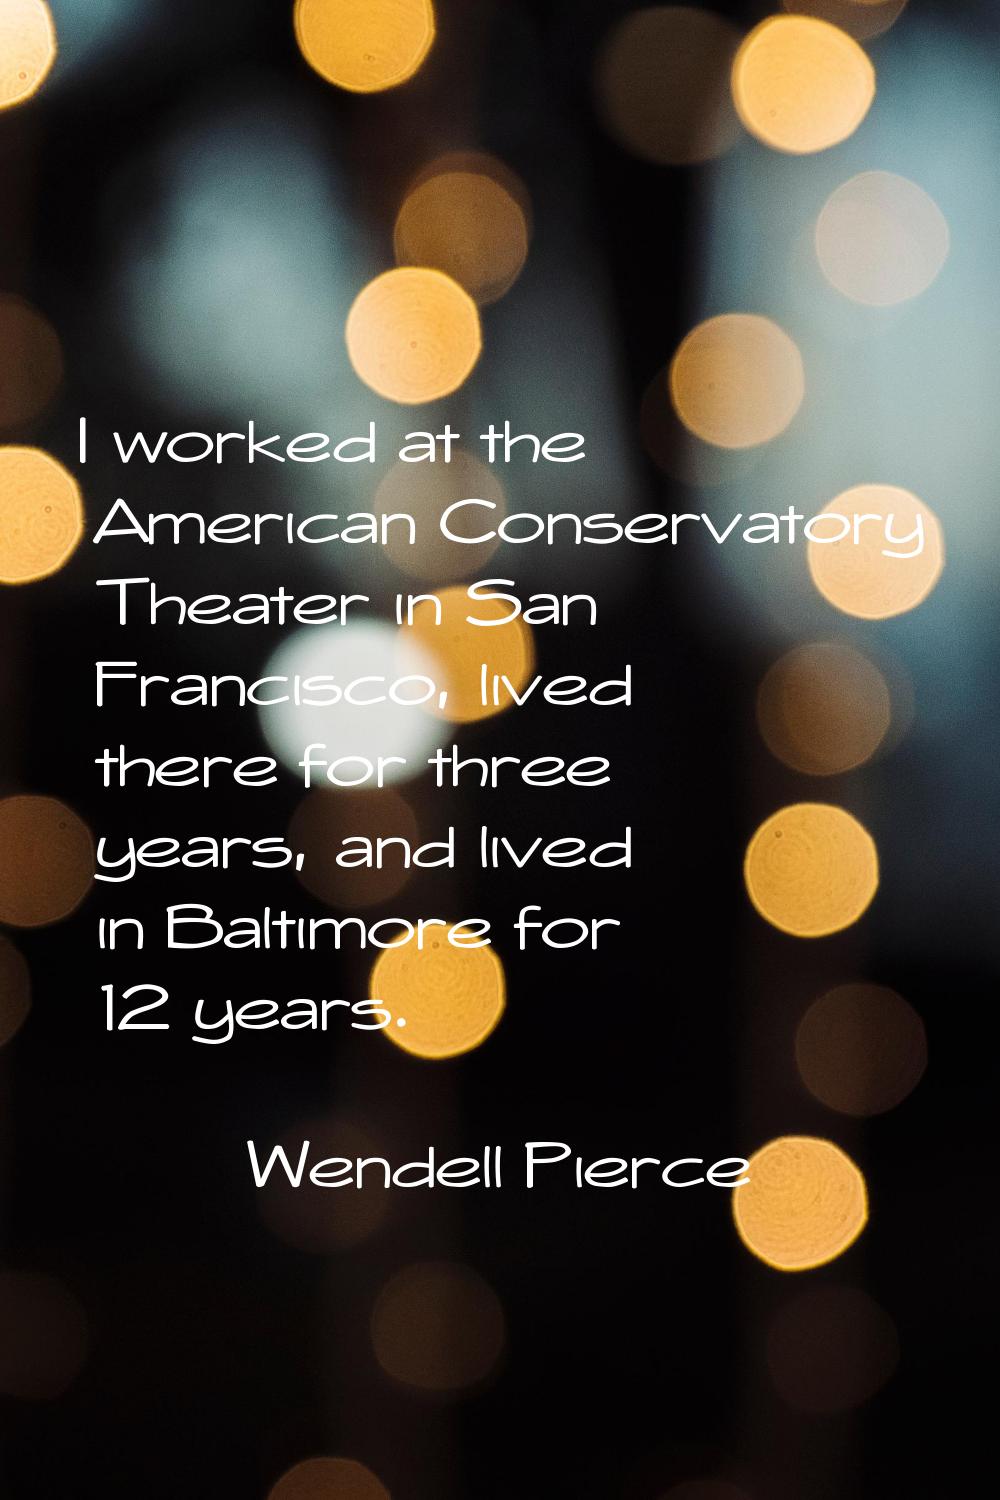 I worked at the American Conservatory Theater in San Francisco, lived there for three years, and li